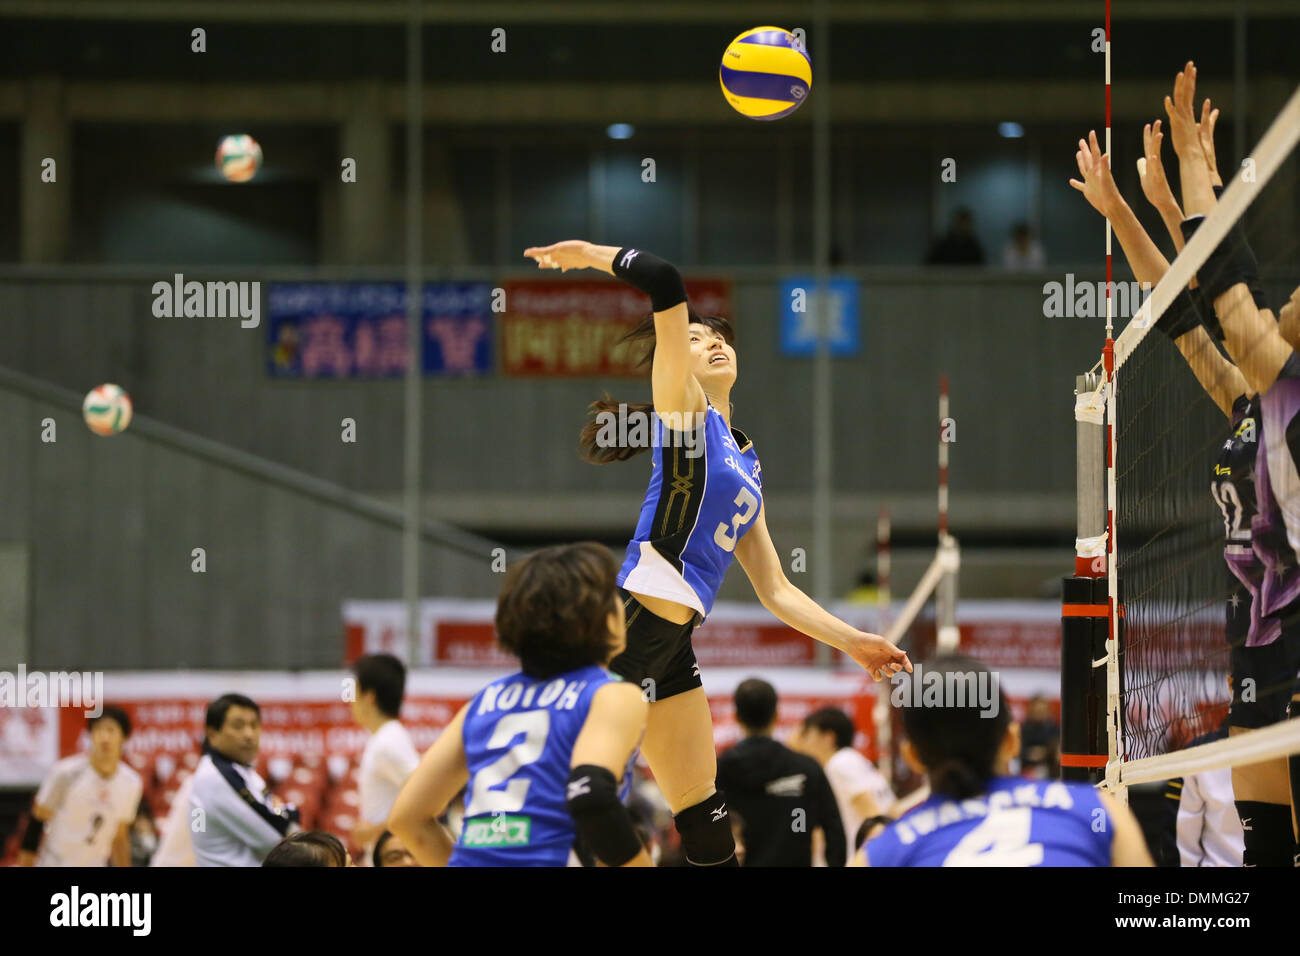 Risa Shinnabe (Springs),  DECEMBER 13, 2013 - Volleyball :  2013 Emperor's Cup and Empress's Cup  All Japan Volleyball Championship women's match  between Hisamitsu Springs 3-1 Hitachi Rivale  at Tokyo Metropolitan Gymnasium, Tokyo, Japan.  (Photo by YUTAKA/AFLO SPORT) Stock Photo